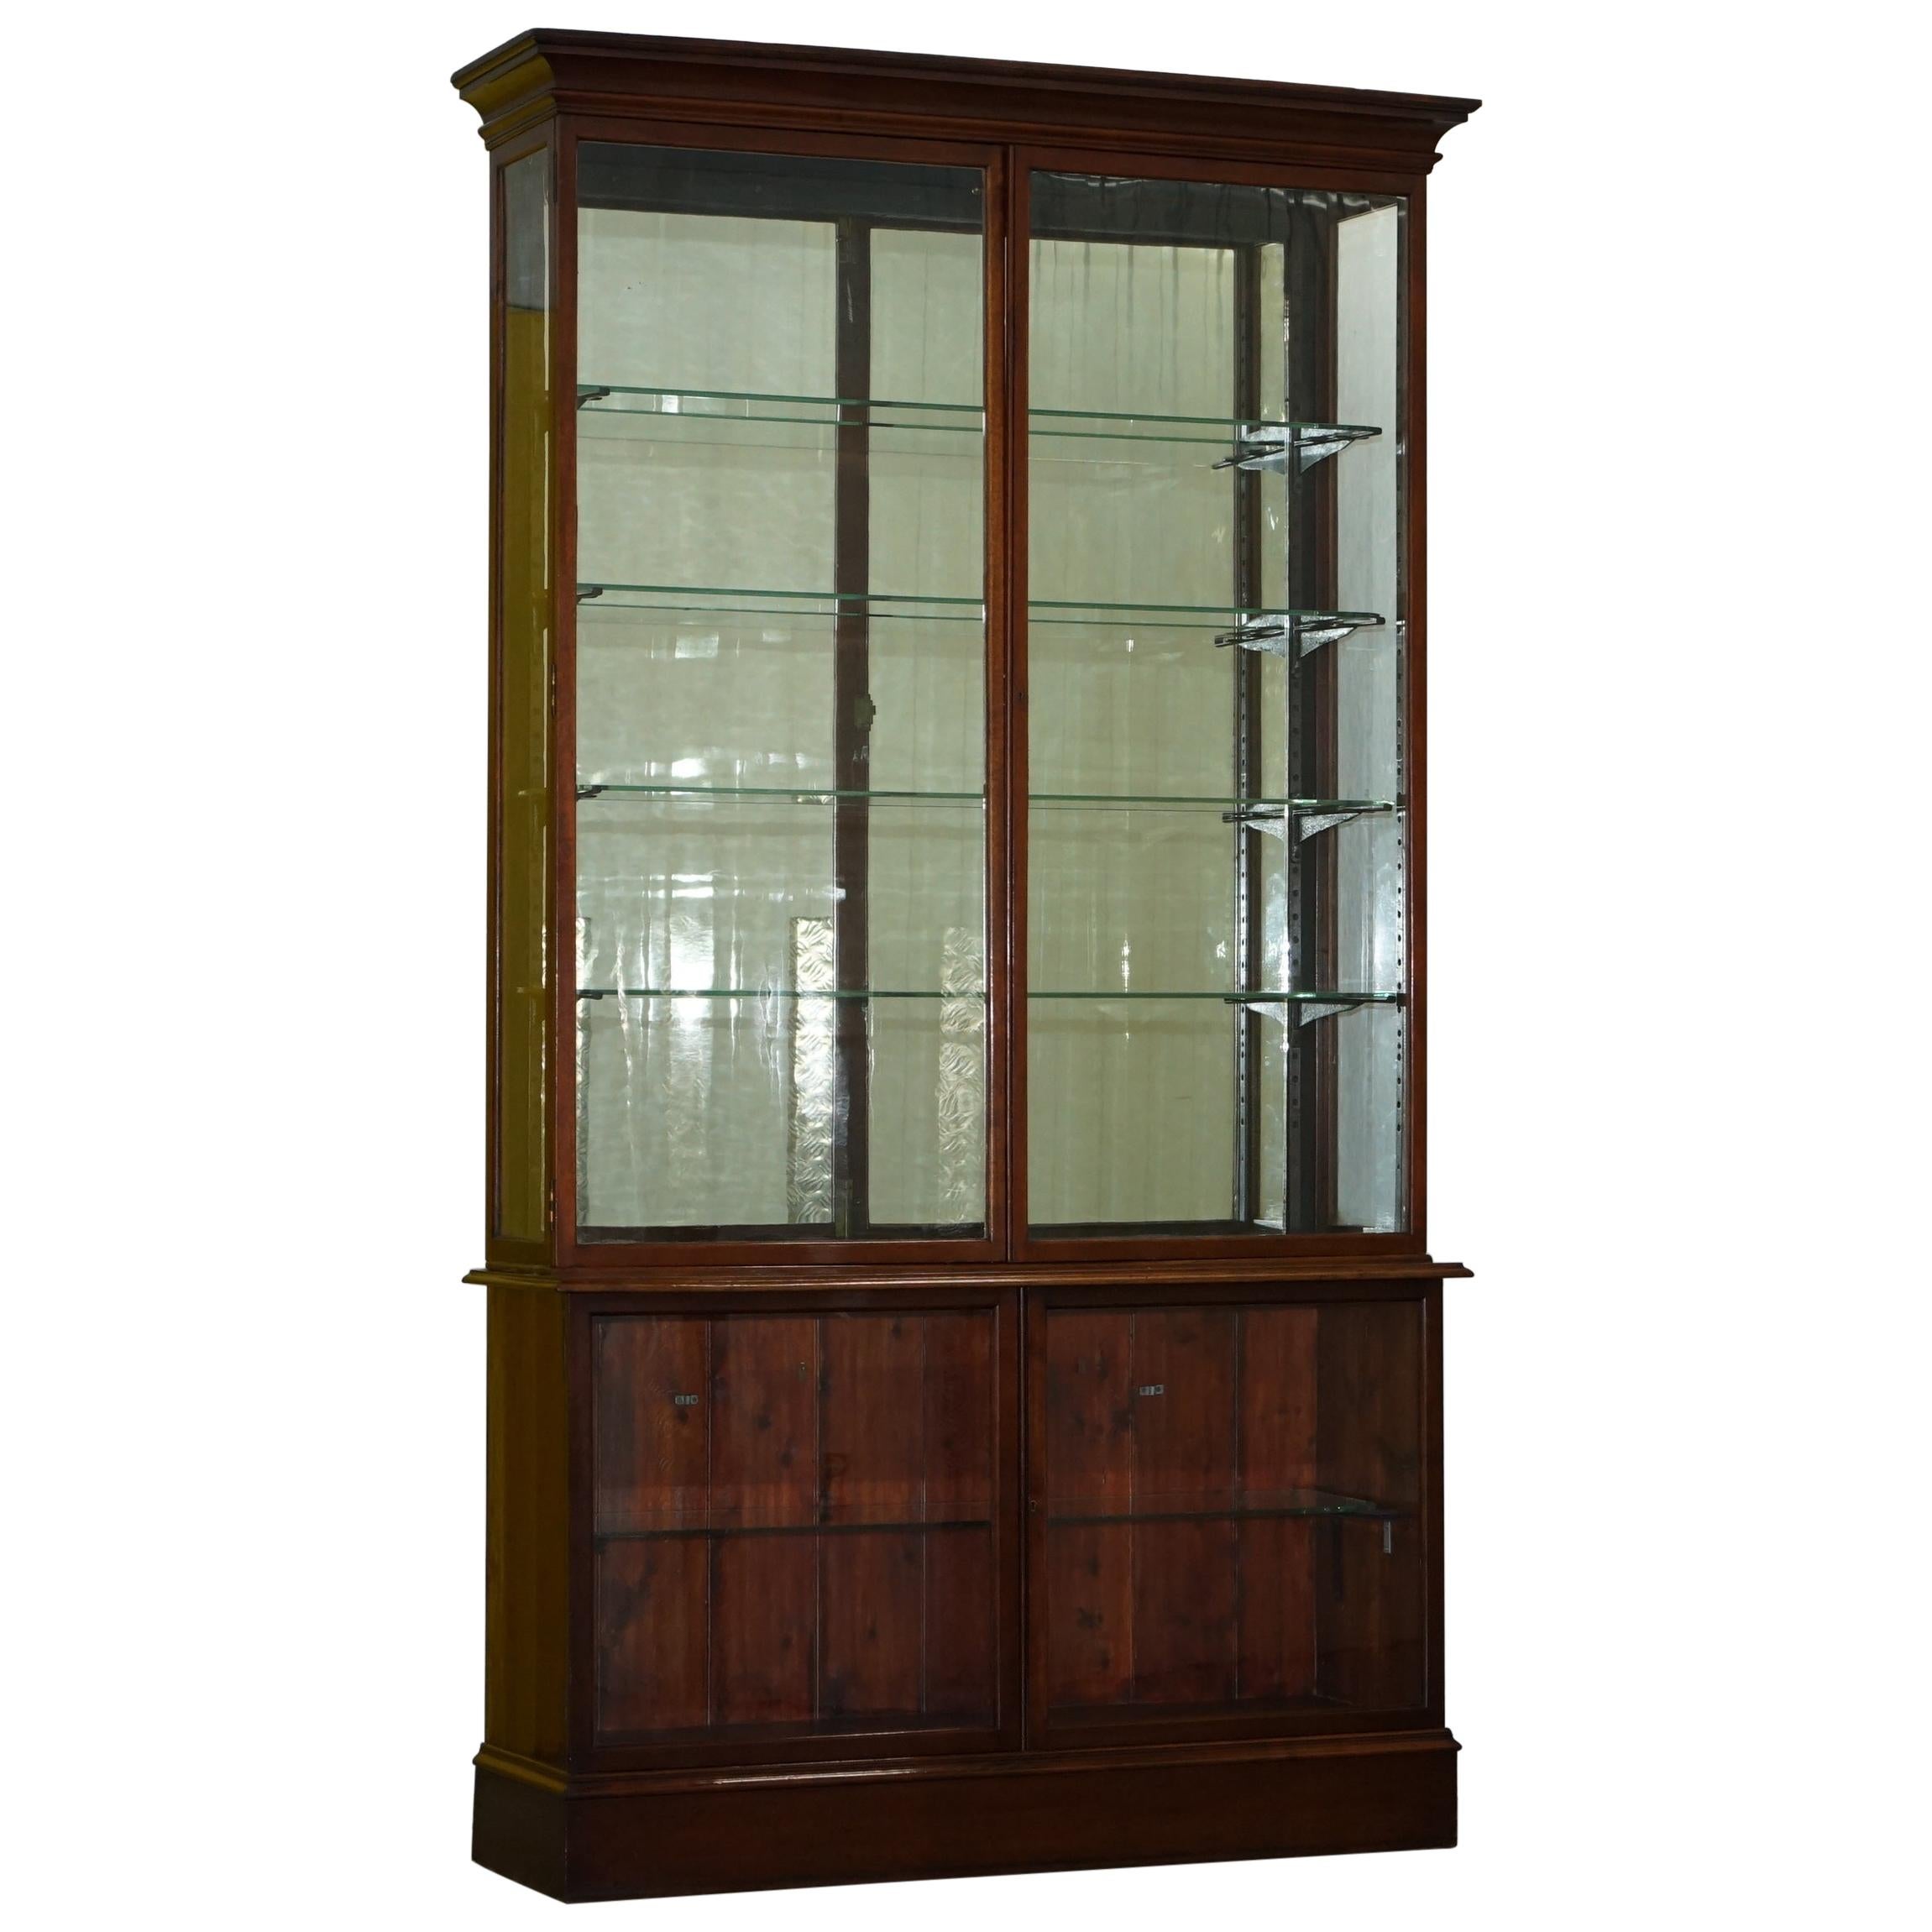 Rare Victorian Haberdashery Apothecary Shops Cabinet Fully Glazed Door Bookcase For Sale